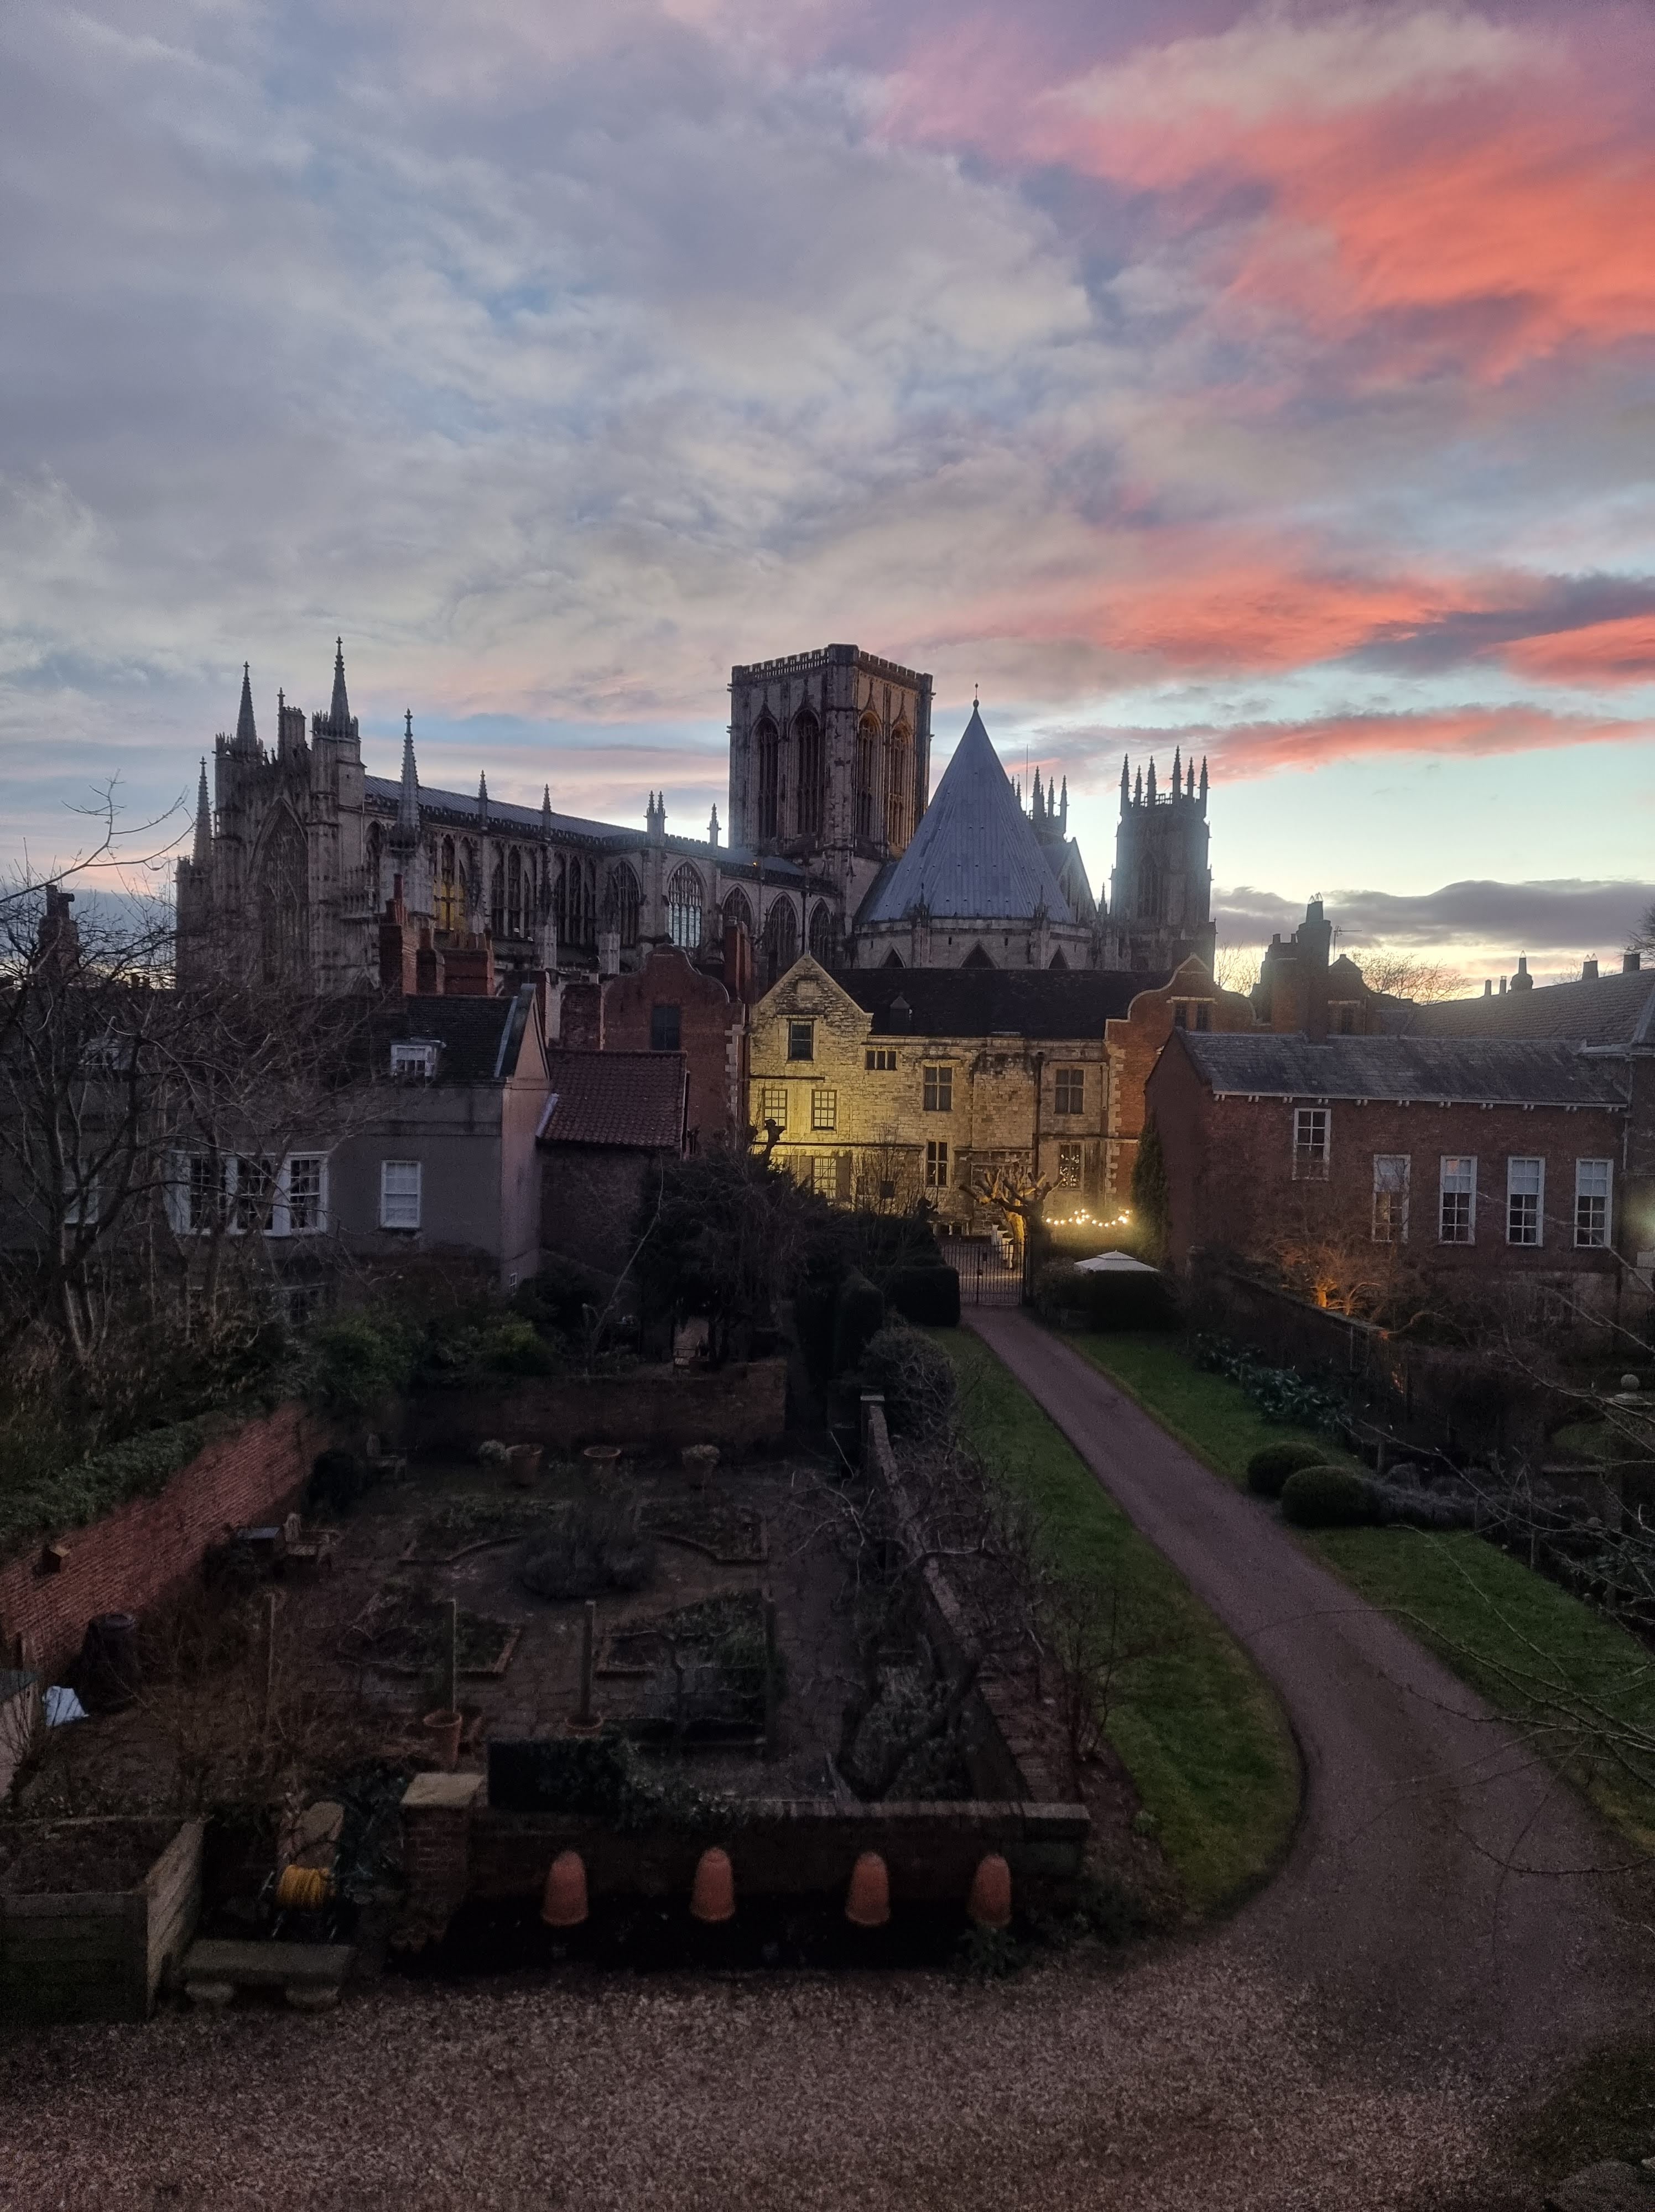 Views of the York Minster from the ancient city walls